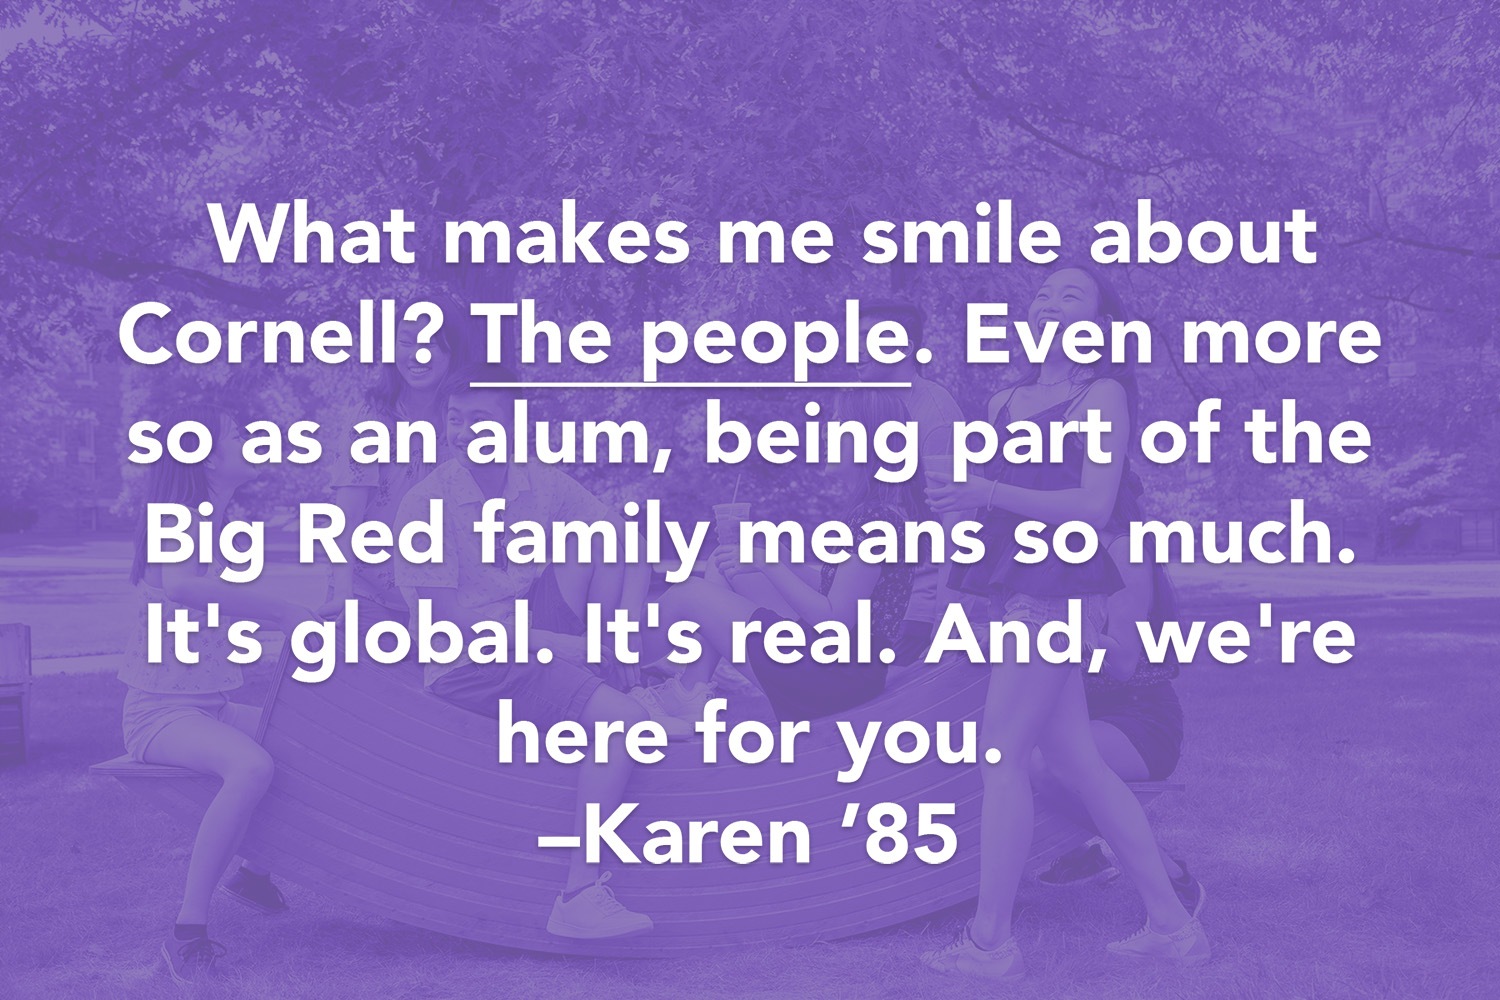 Quote: What makes me smile about Cornell? The people. Even more so as an alum, being part of the Big Red family means so much. It's global. It's real. And, we're here for you. -Karen '85